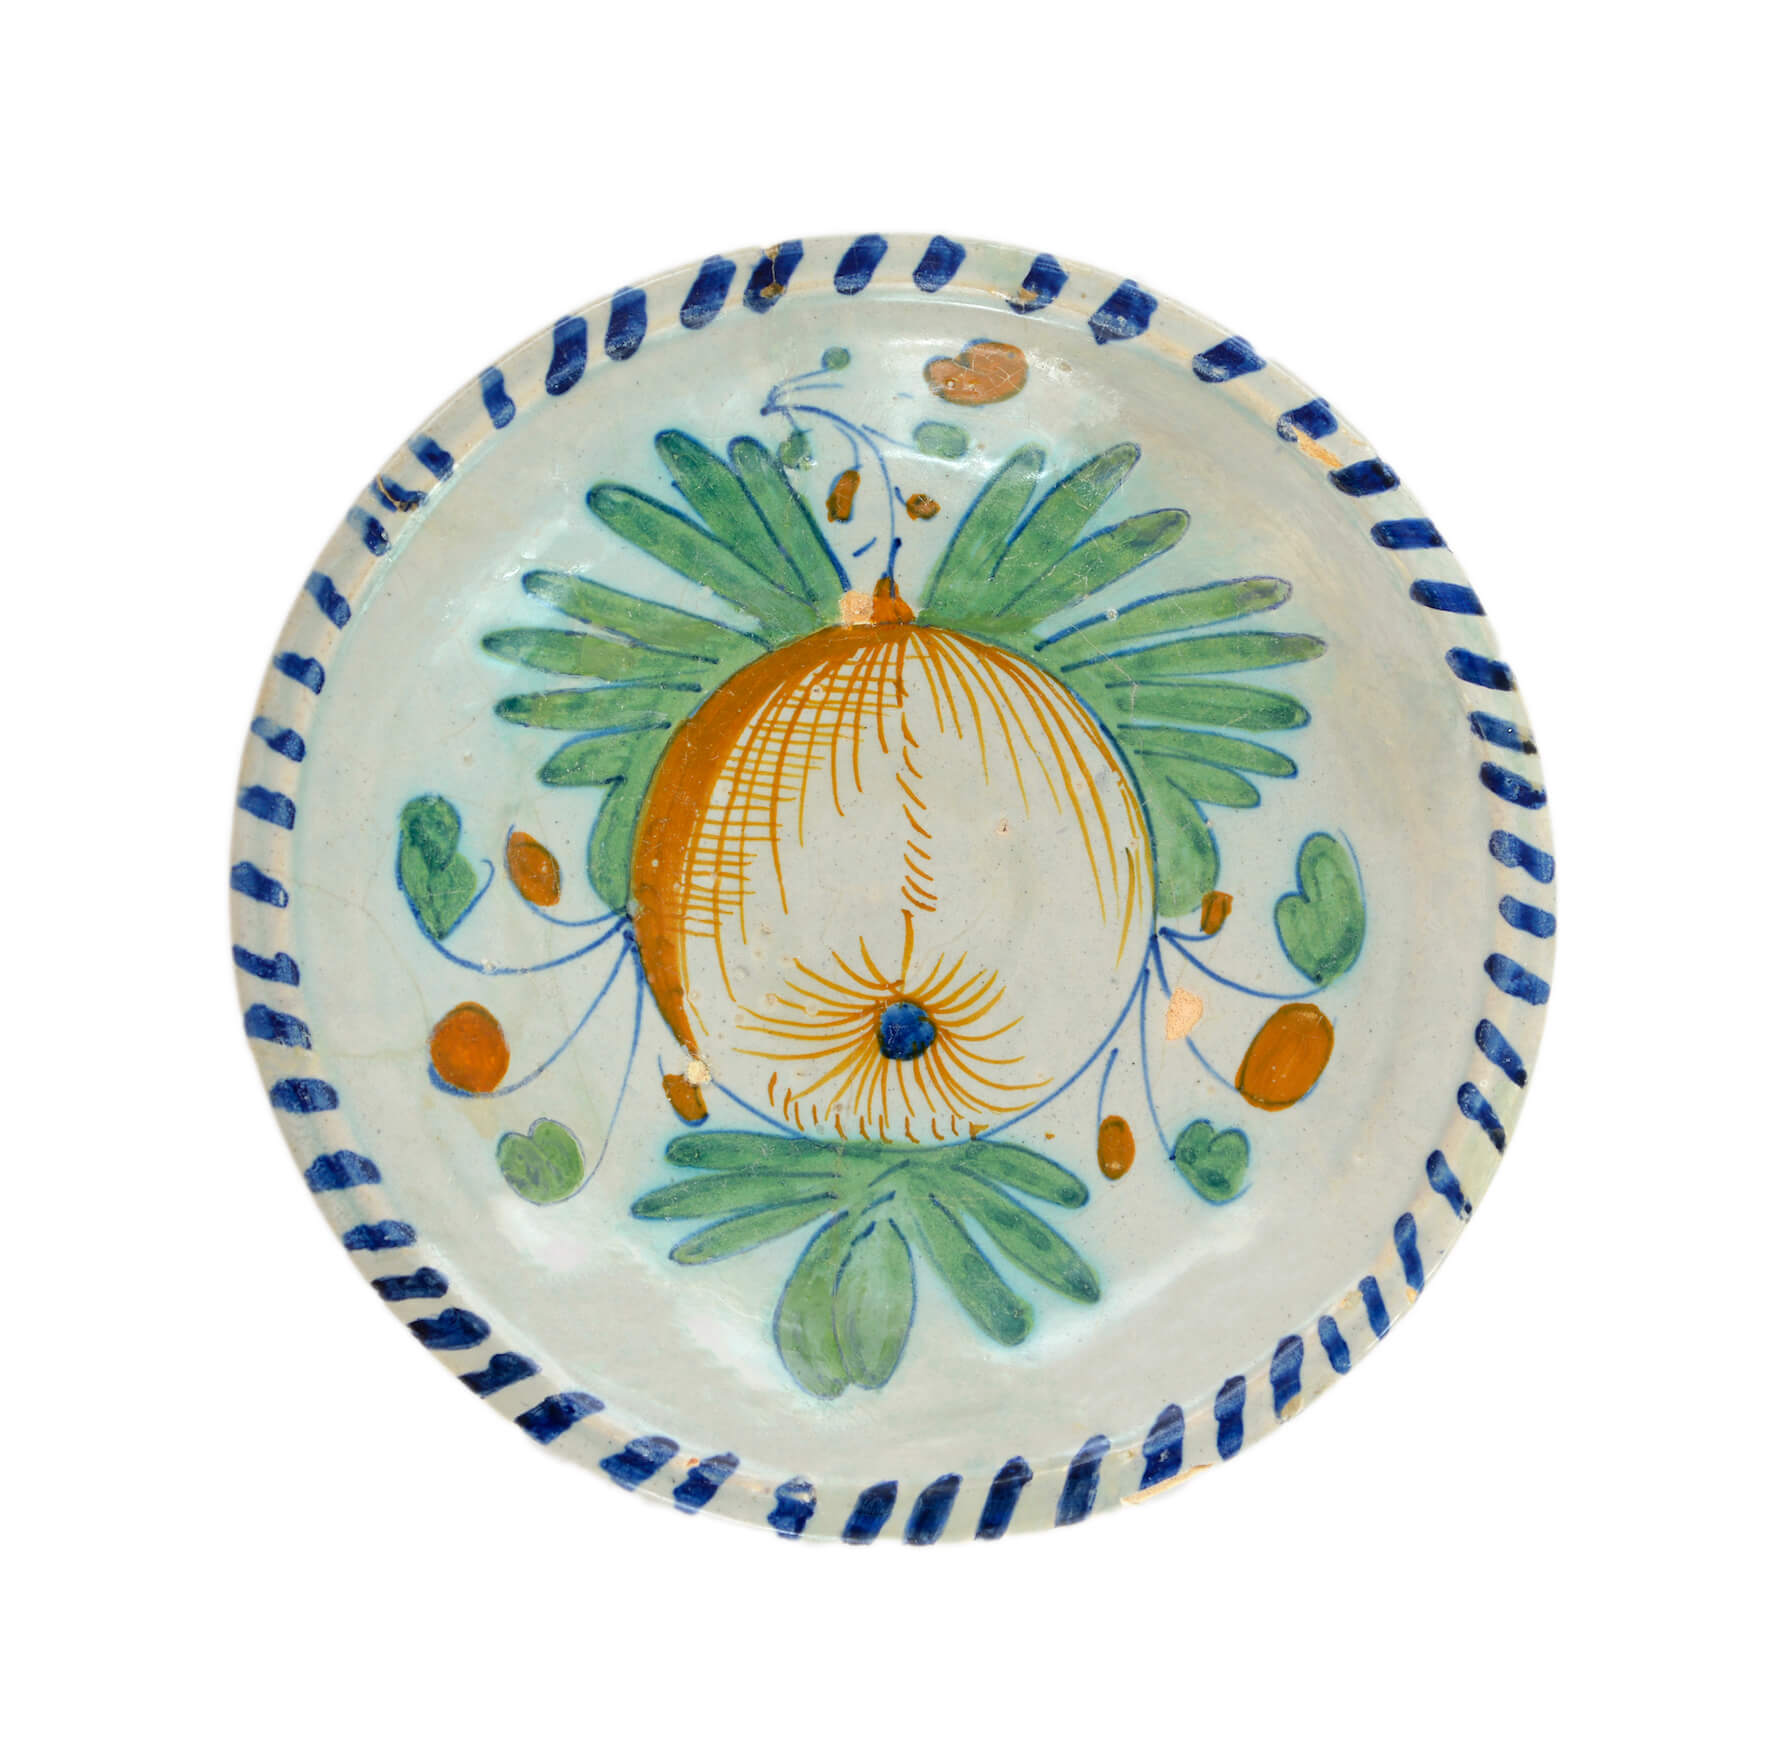 Antique majolica polychrome plate with a beautiful fruit